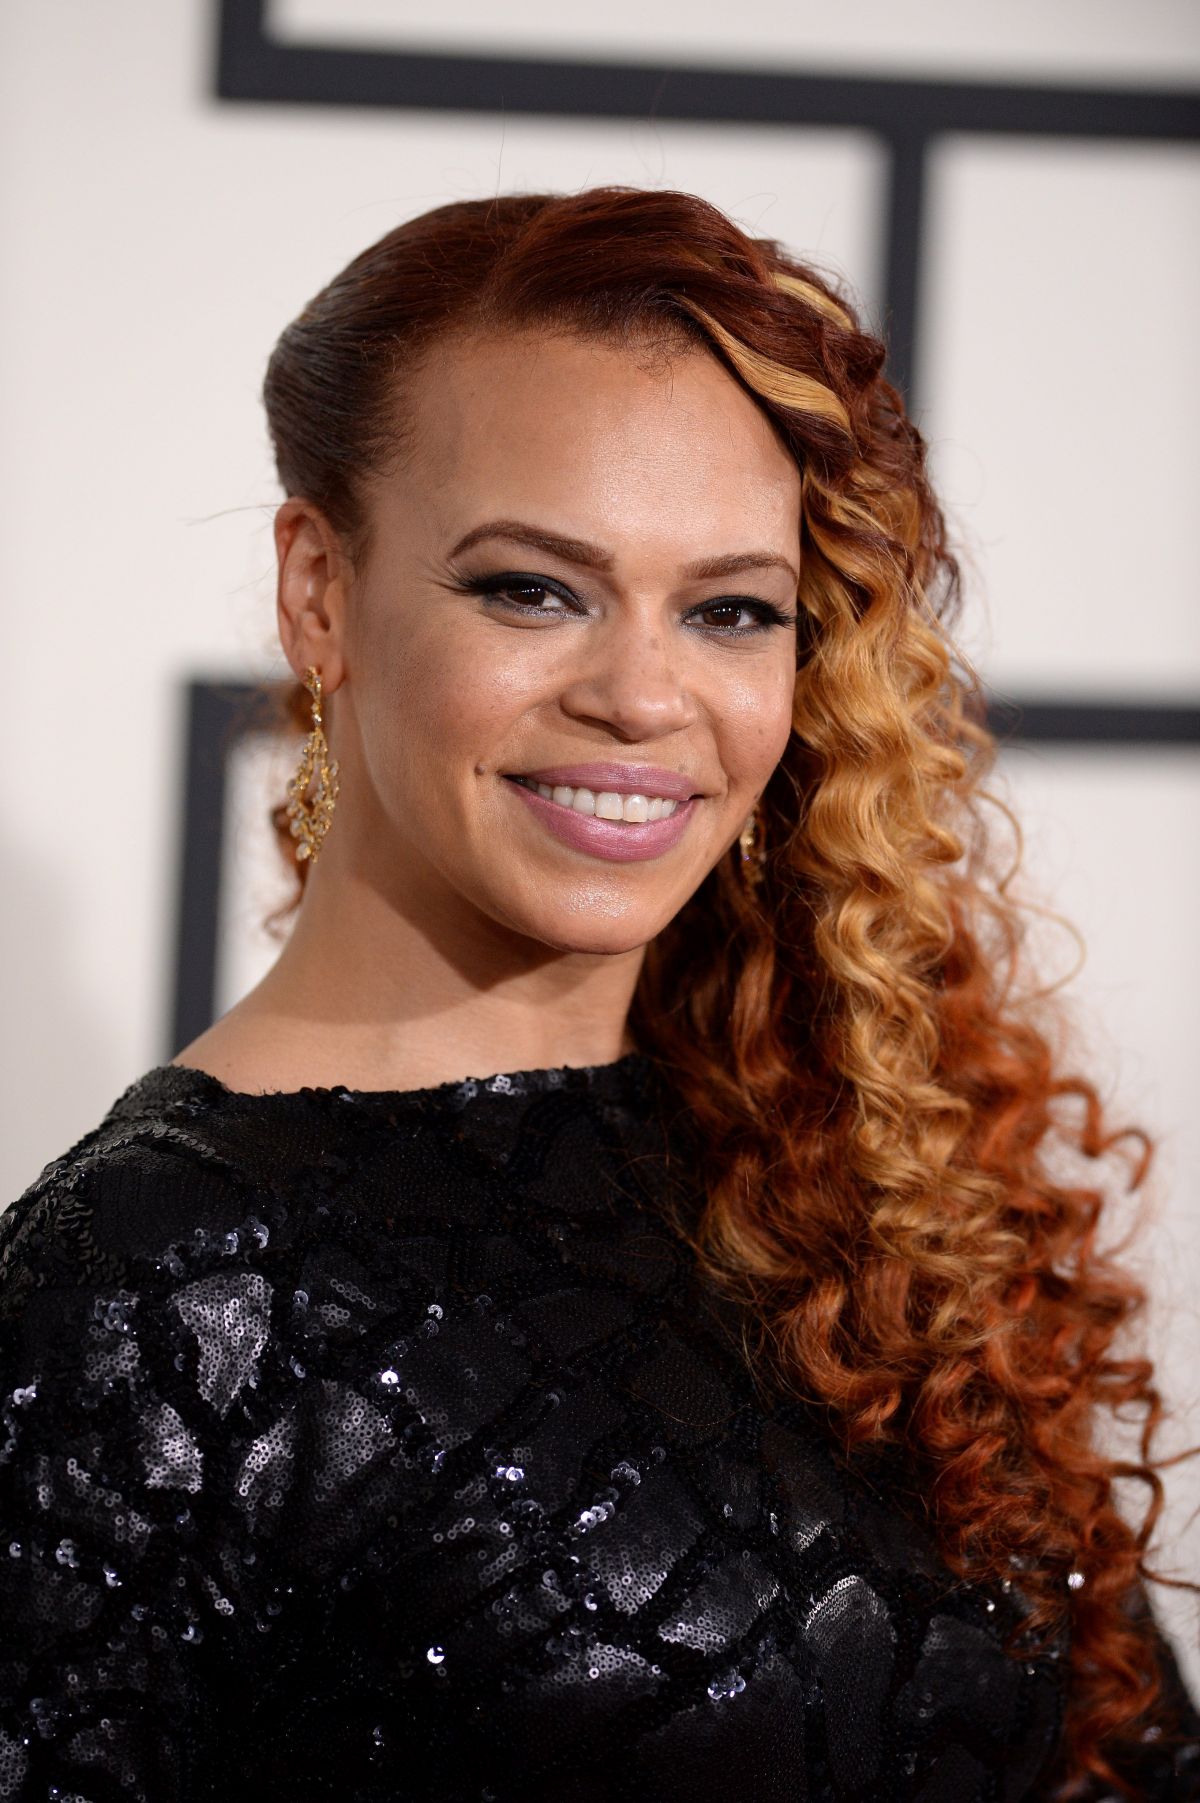 More Pictures Of Faith Evans. quotes of faith evans. 